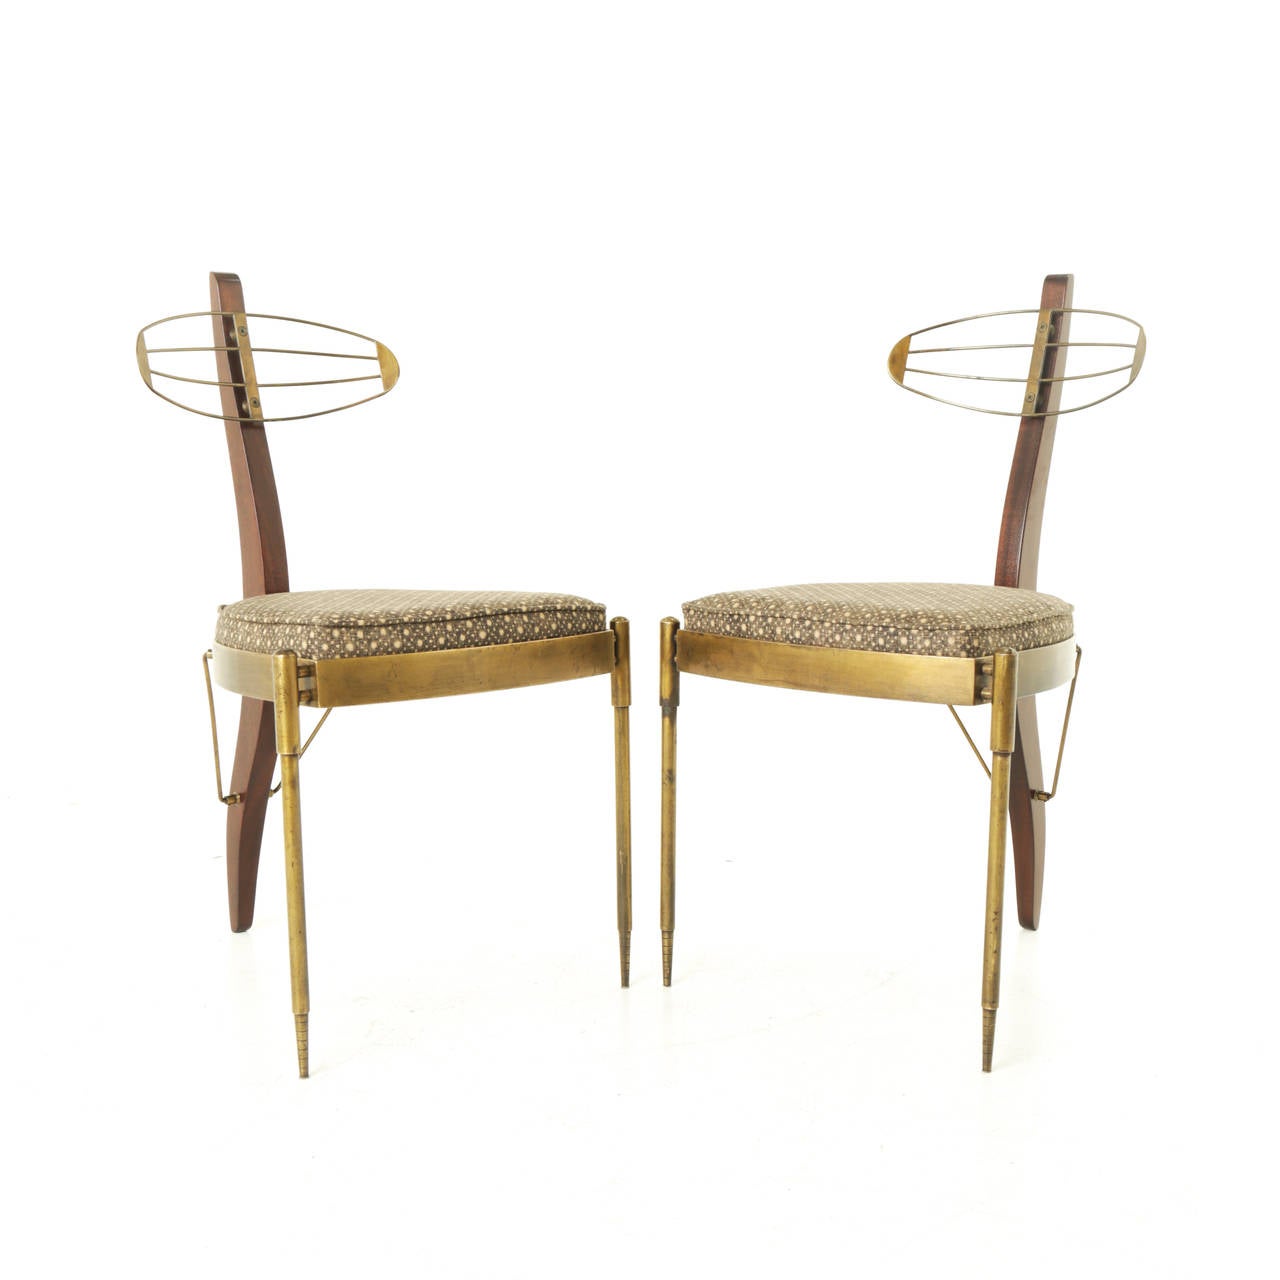 Pair of Pedro Useche’s famous three-legged chair. The solid bronze bases show a rich yet worn patina. They are finely fabricated and constructed with extensive machining. These chairs are truly special and beautiful. Signed by the artist with a